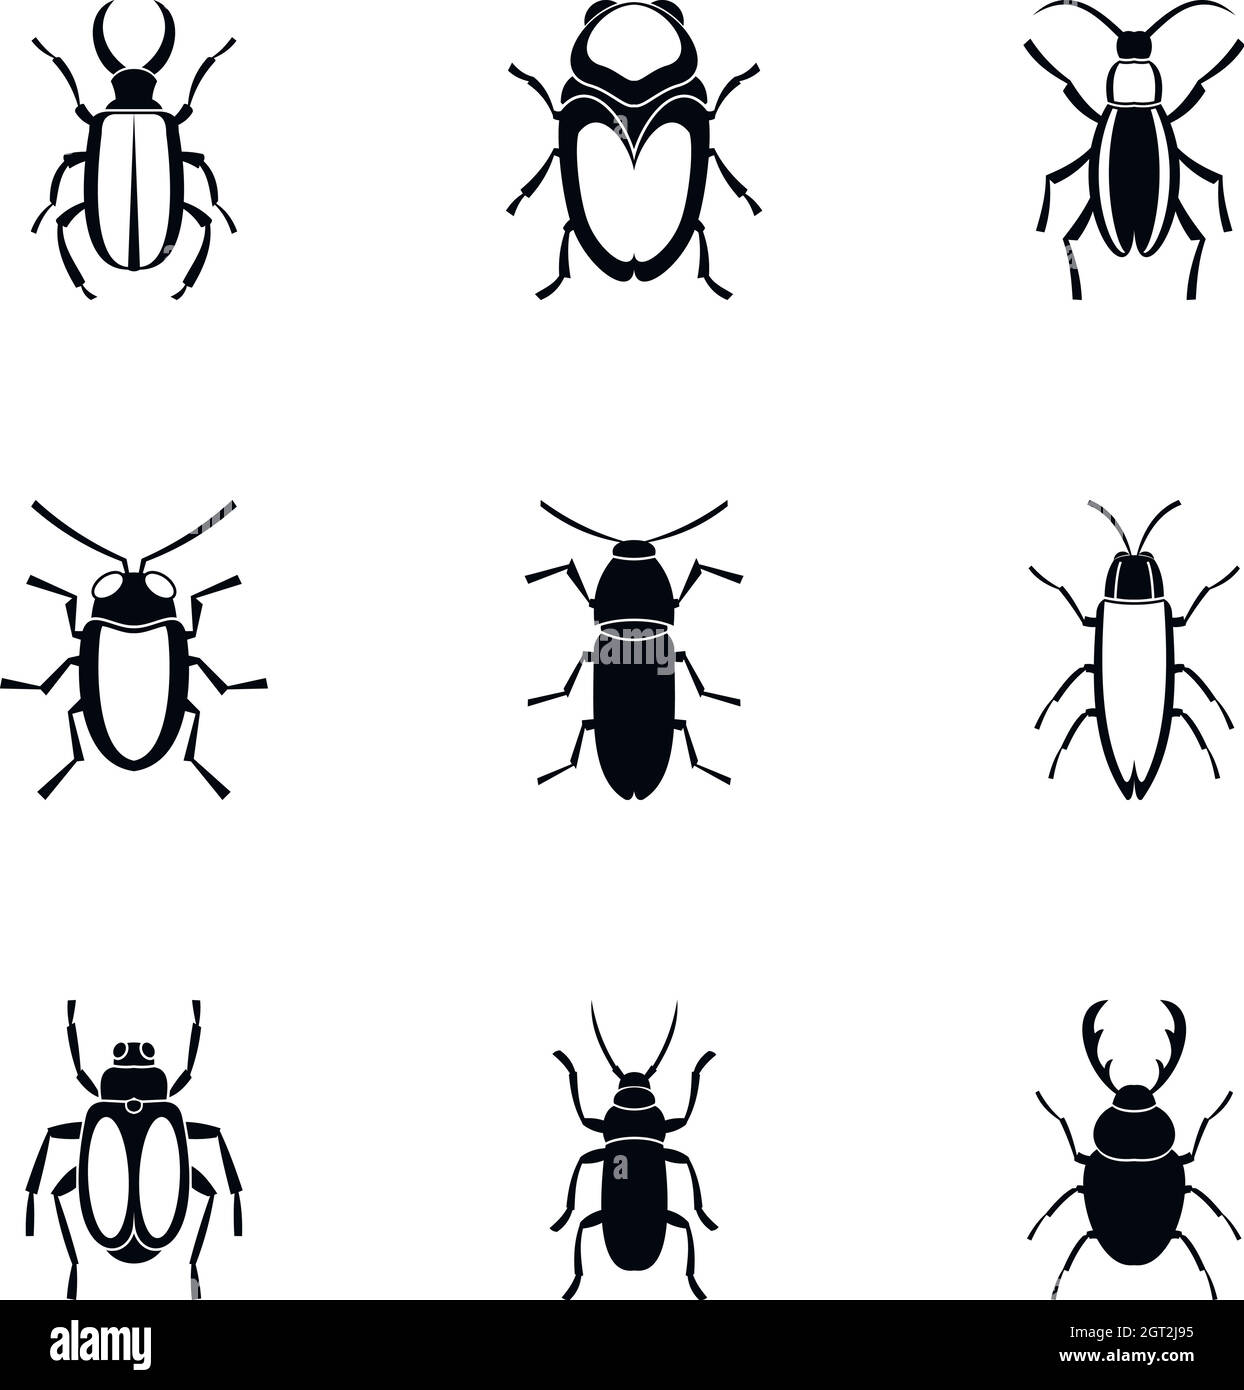 Crawling beetles icons set, simple style Stock Vector